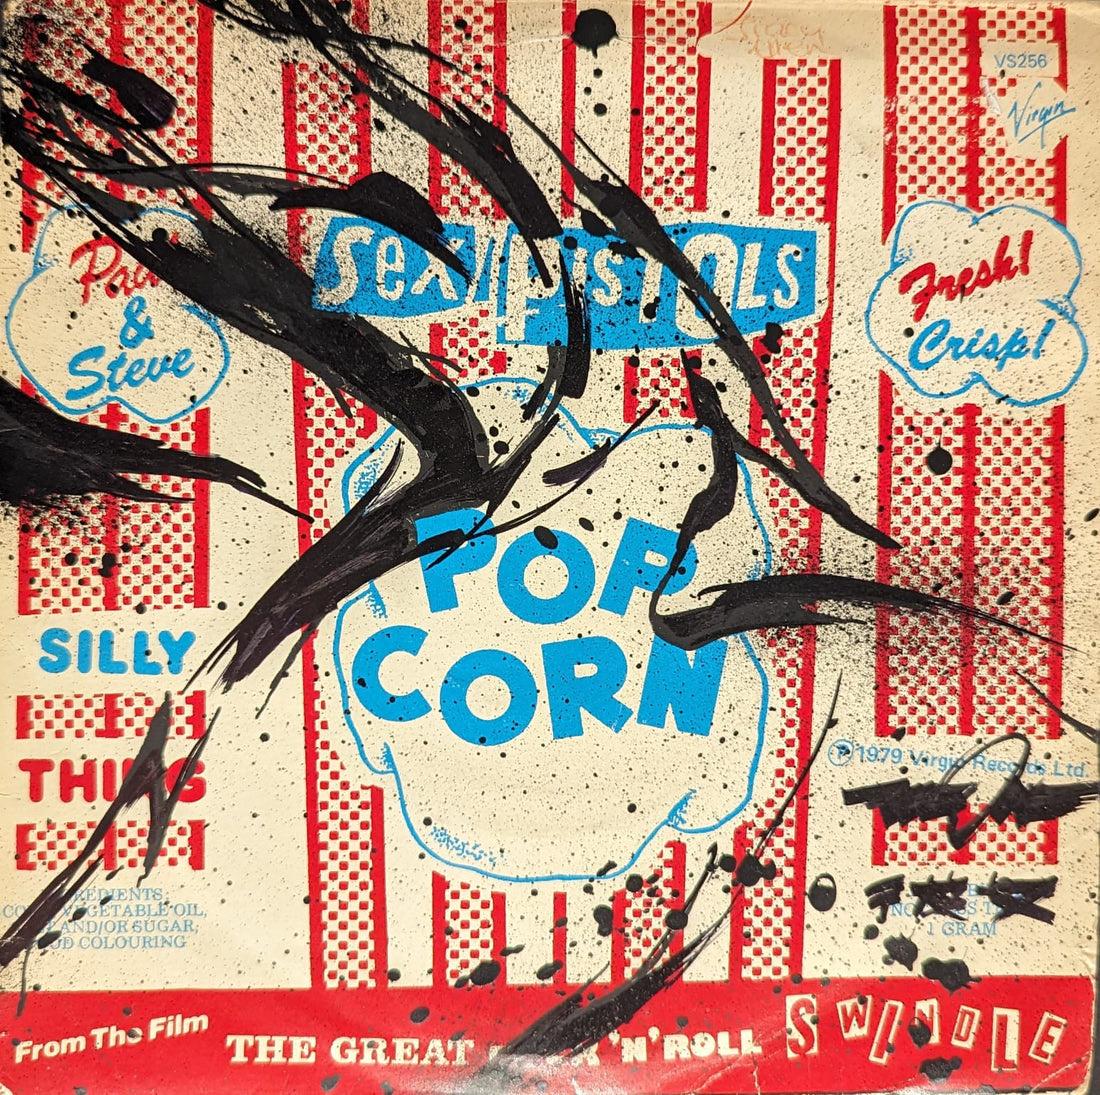 SheOne, [ POPCORN ] III, 2023

Original mixed media work on Vintage Sex Pistols 7" Vinyl

17.78 x 17.78 cm  7 x 7 in



James Choules aka SheOne is a British street artist famous for his abstract expressive pieces of art. Through his abstract